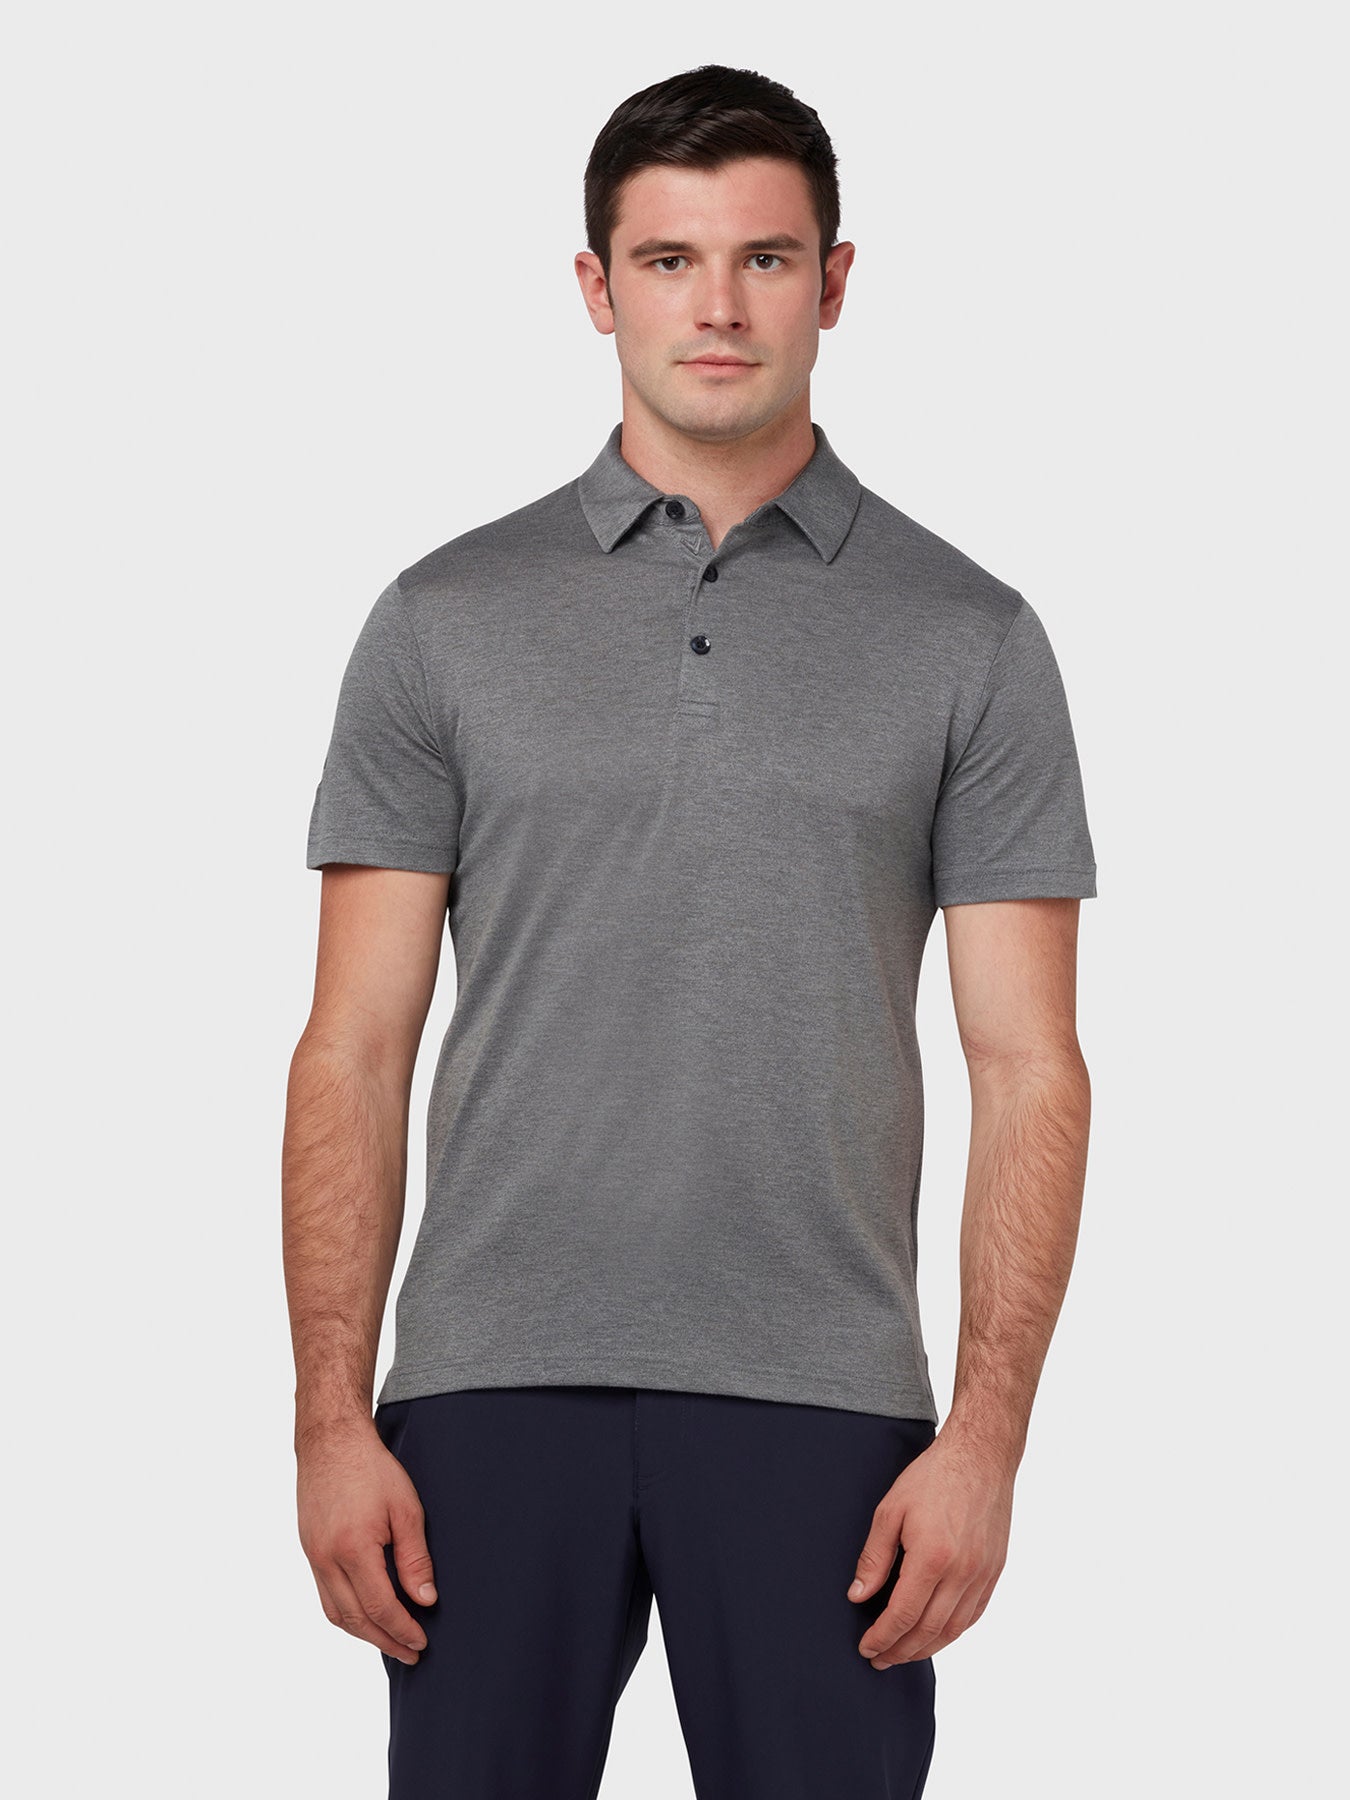 View Soft Touch Solid Polo In Black Heather Black Heather M information